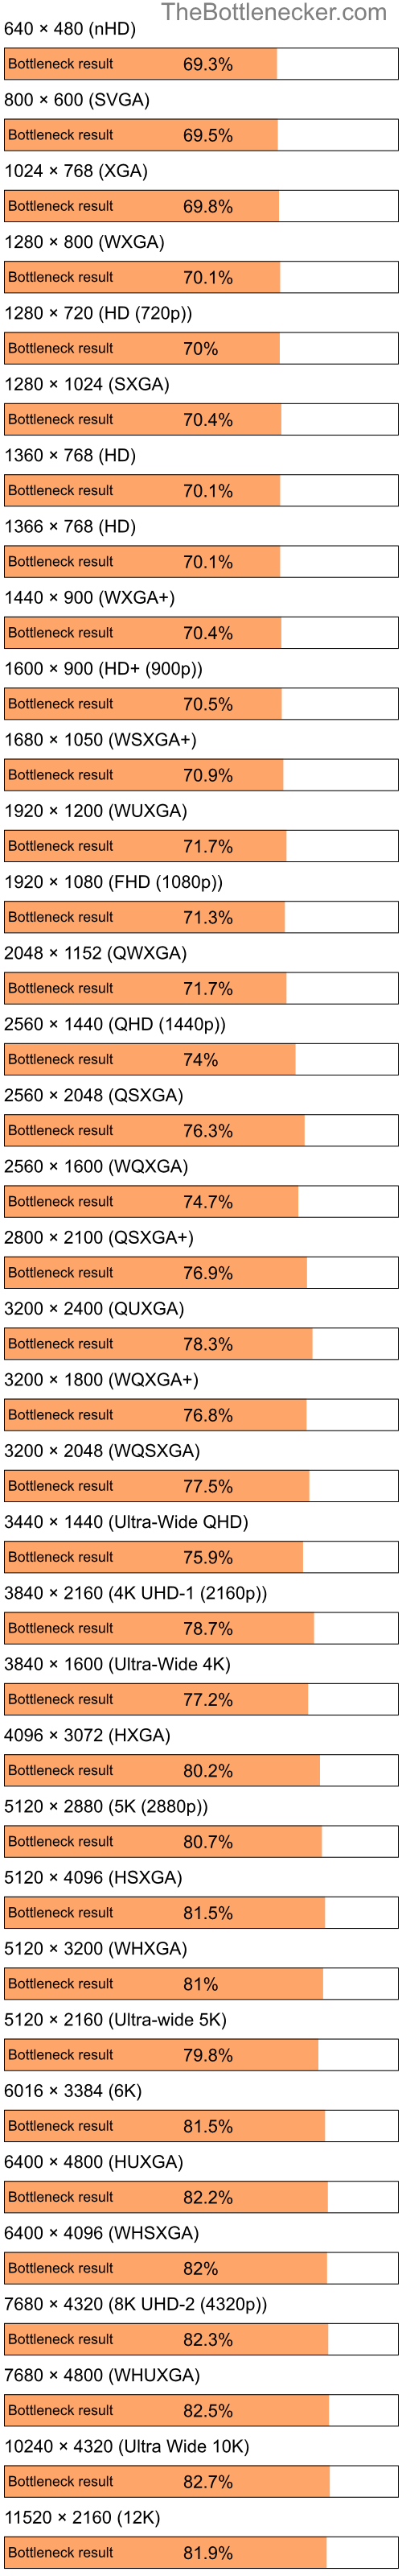 Bottleneck results by resolution for Intel Celeron M 420 and AMD Mobility Radeon X1350 in Processor Intense Tasks